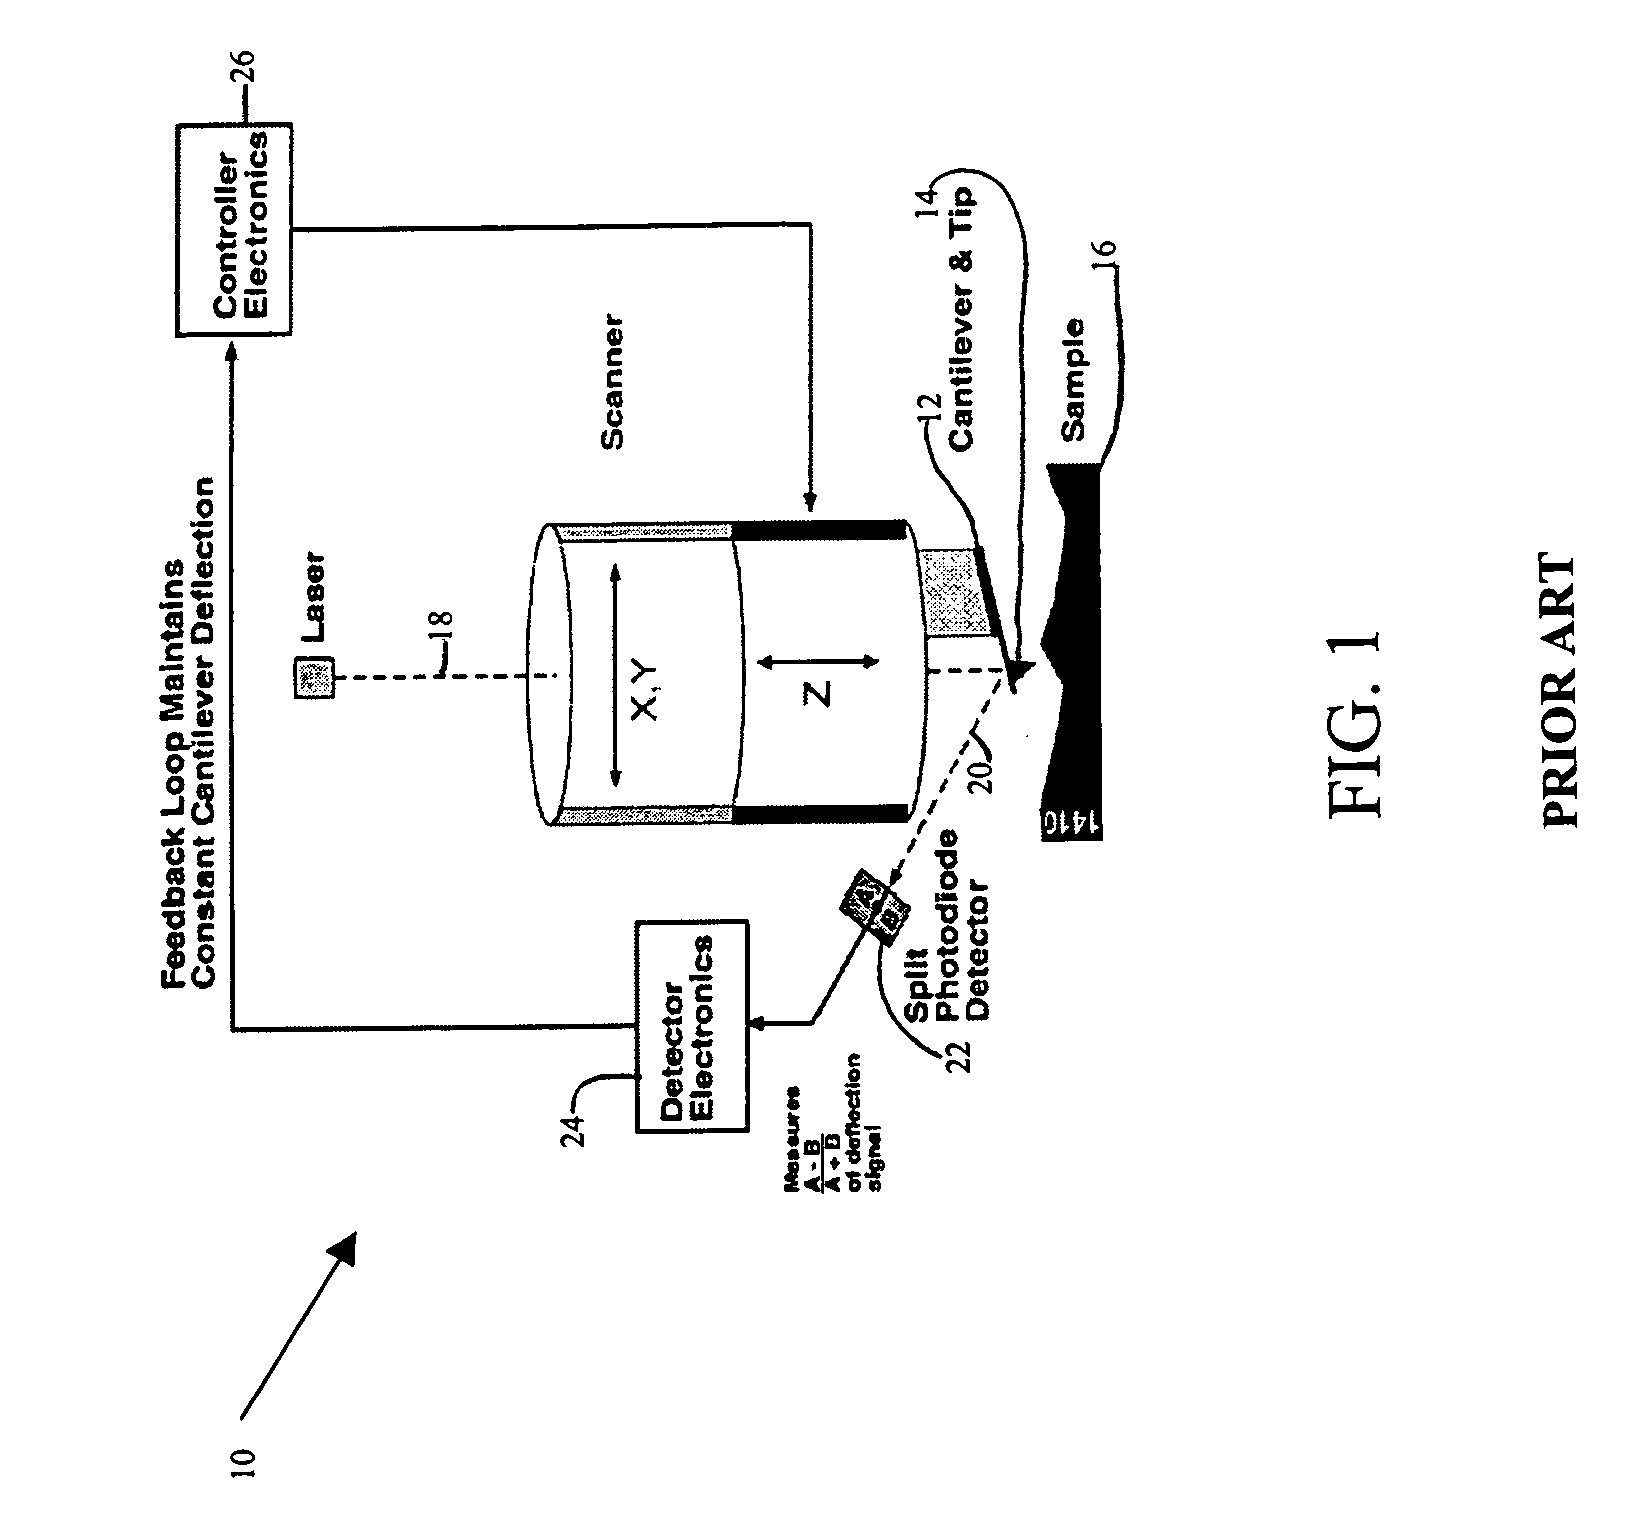 System and method for the analysis of atomic force microscopy data